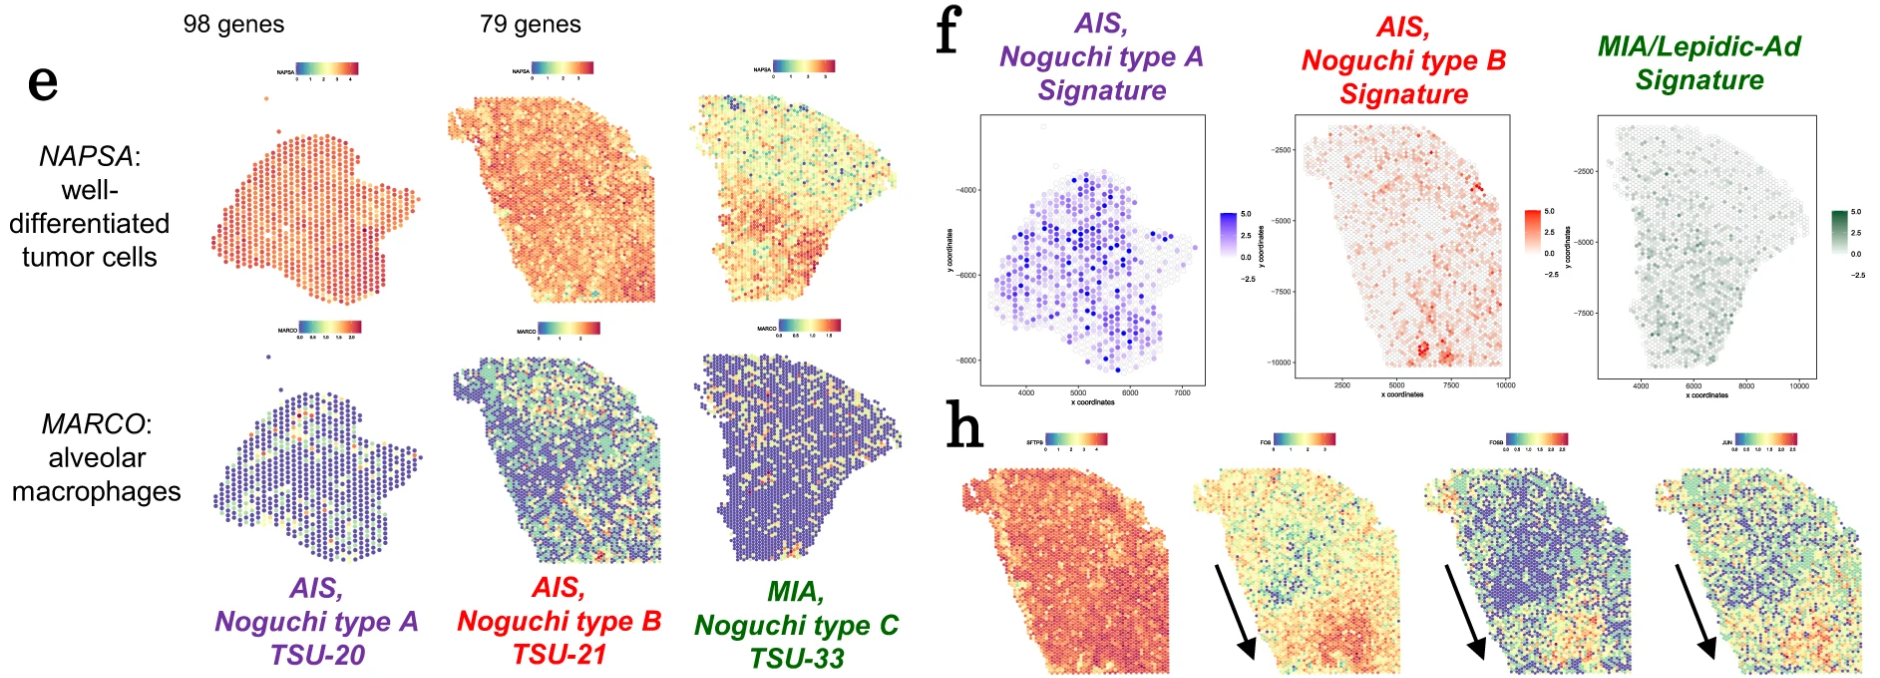 Figure 1. (e) Visium spatial transcriptomic analysis for three representative cases (TSU-20, TSU-21, and TSU-33). Expression patterns of marker genes for well-differentiated tumor cells (NAPSA) and alveolar macrophages (MARCO) are represented. (f) Enrichment scores of transcriptome signature genes in the corresponding histological types in Visium data. (h) Spatial expression patterns of tumor cell markers in Visium data. Image adapted from Figure 6 from Haga et al. 2023. (CC BY 4.0).